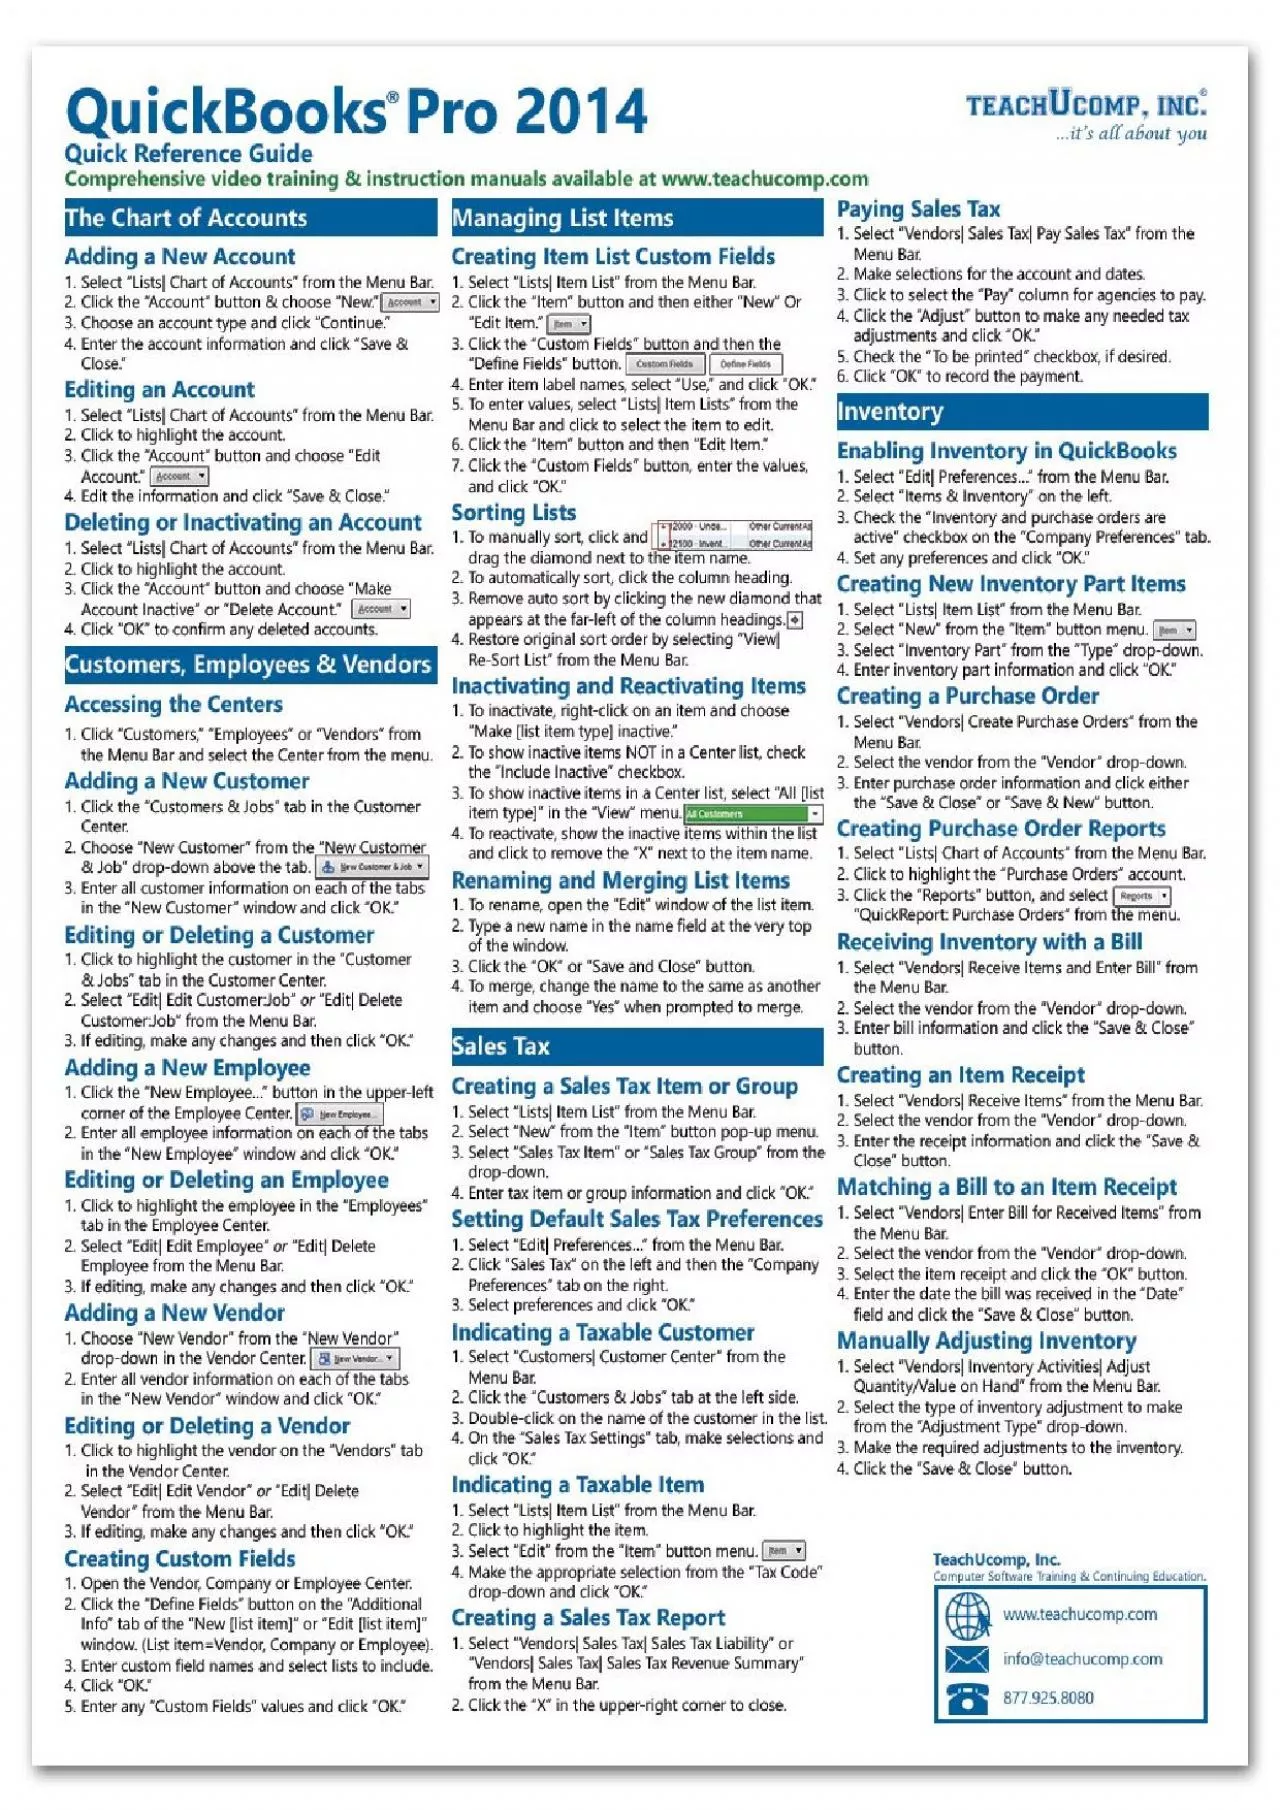 (EBOOK)-QuickBooks Pro 2014 Quick Reference Training Card - Laminated Guide Cheat Sheet